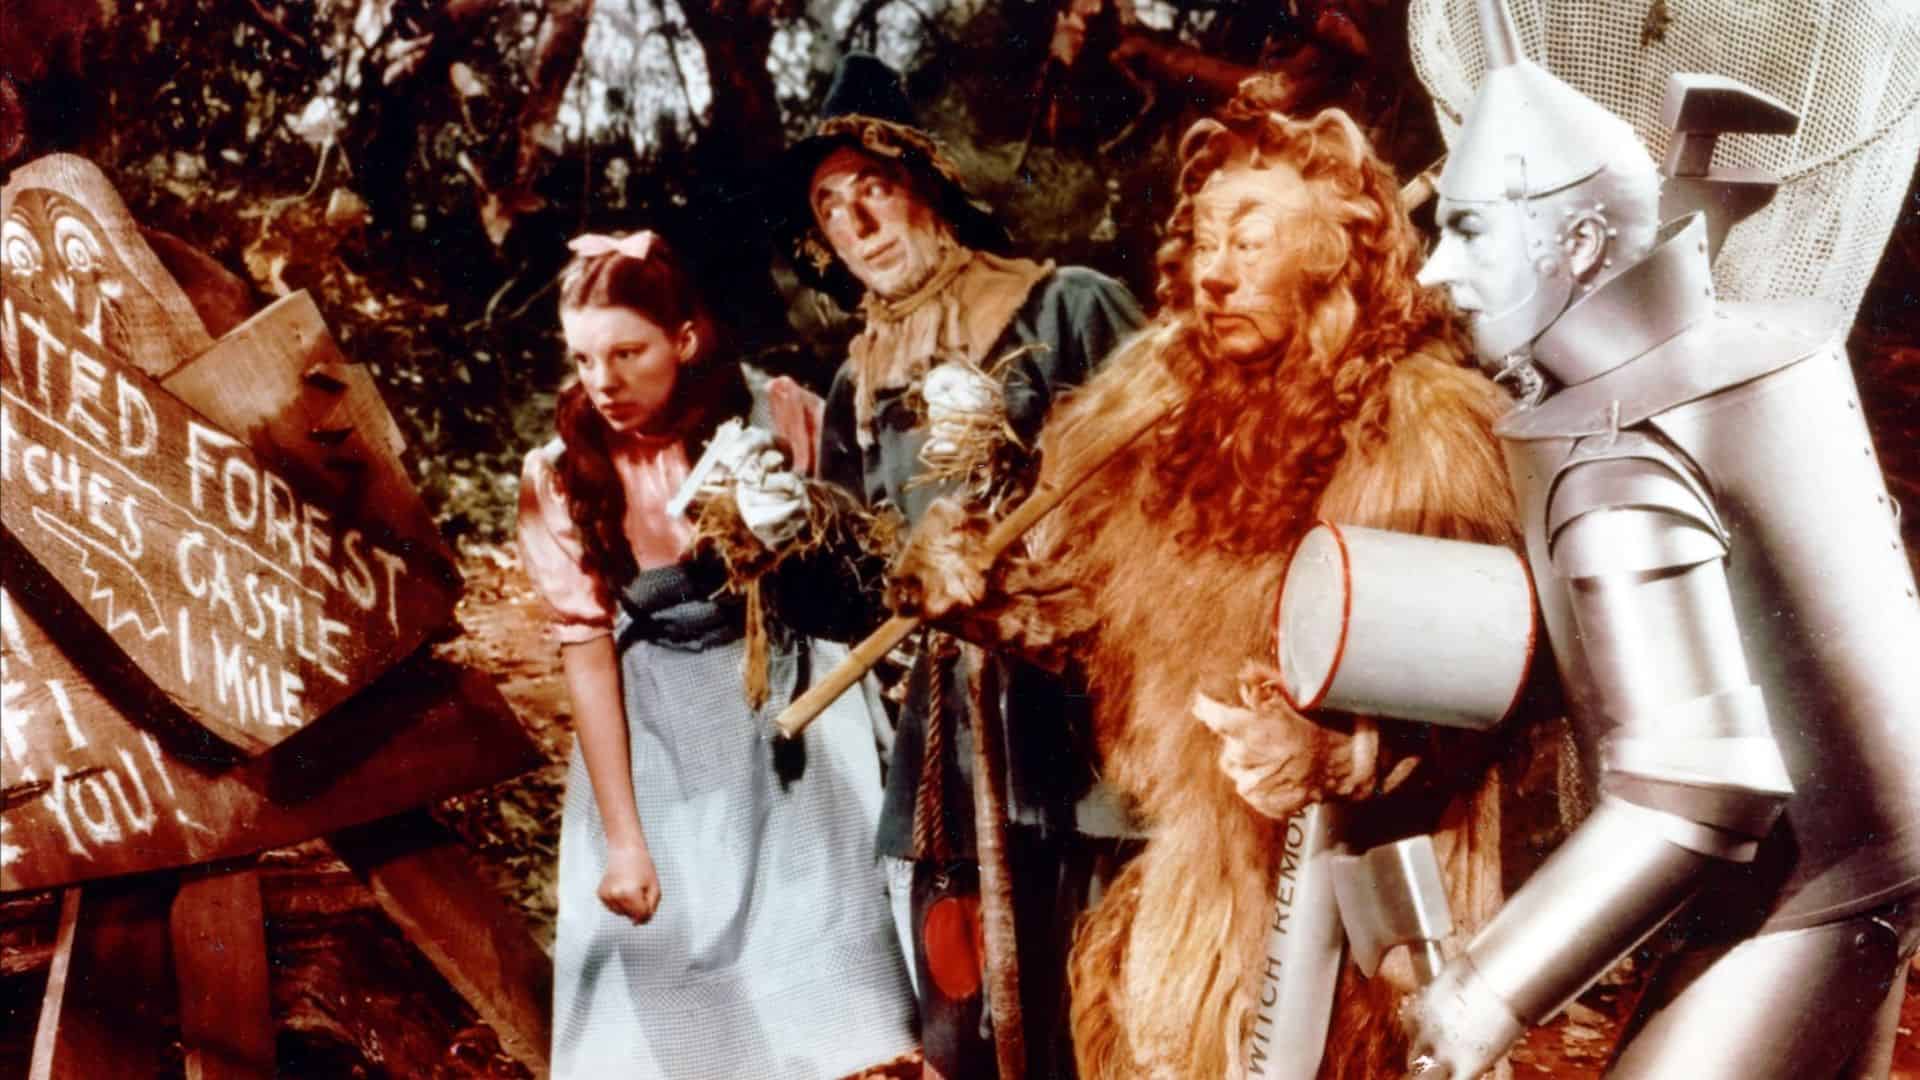 A girl, a scarecrow, a lion, and a tin man read signs for a haunted forest in this image from Metro-Goldwyn-Mayer.